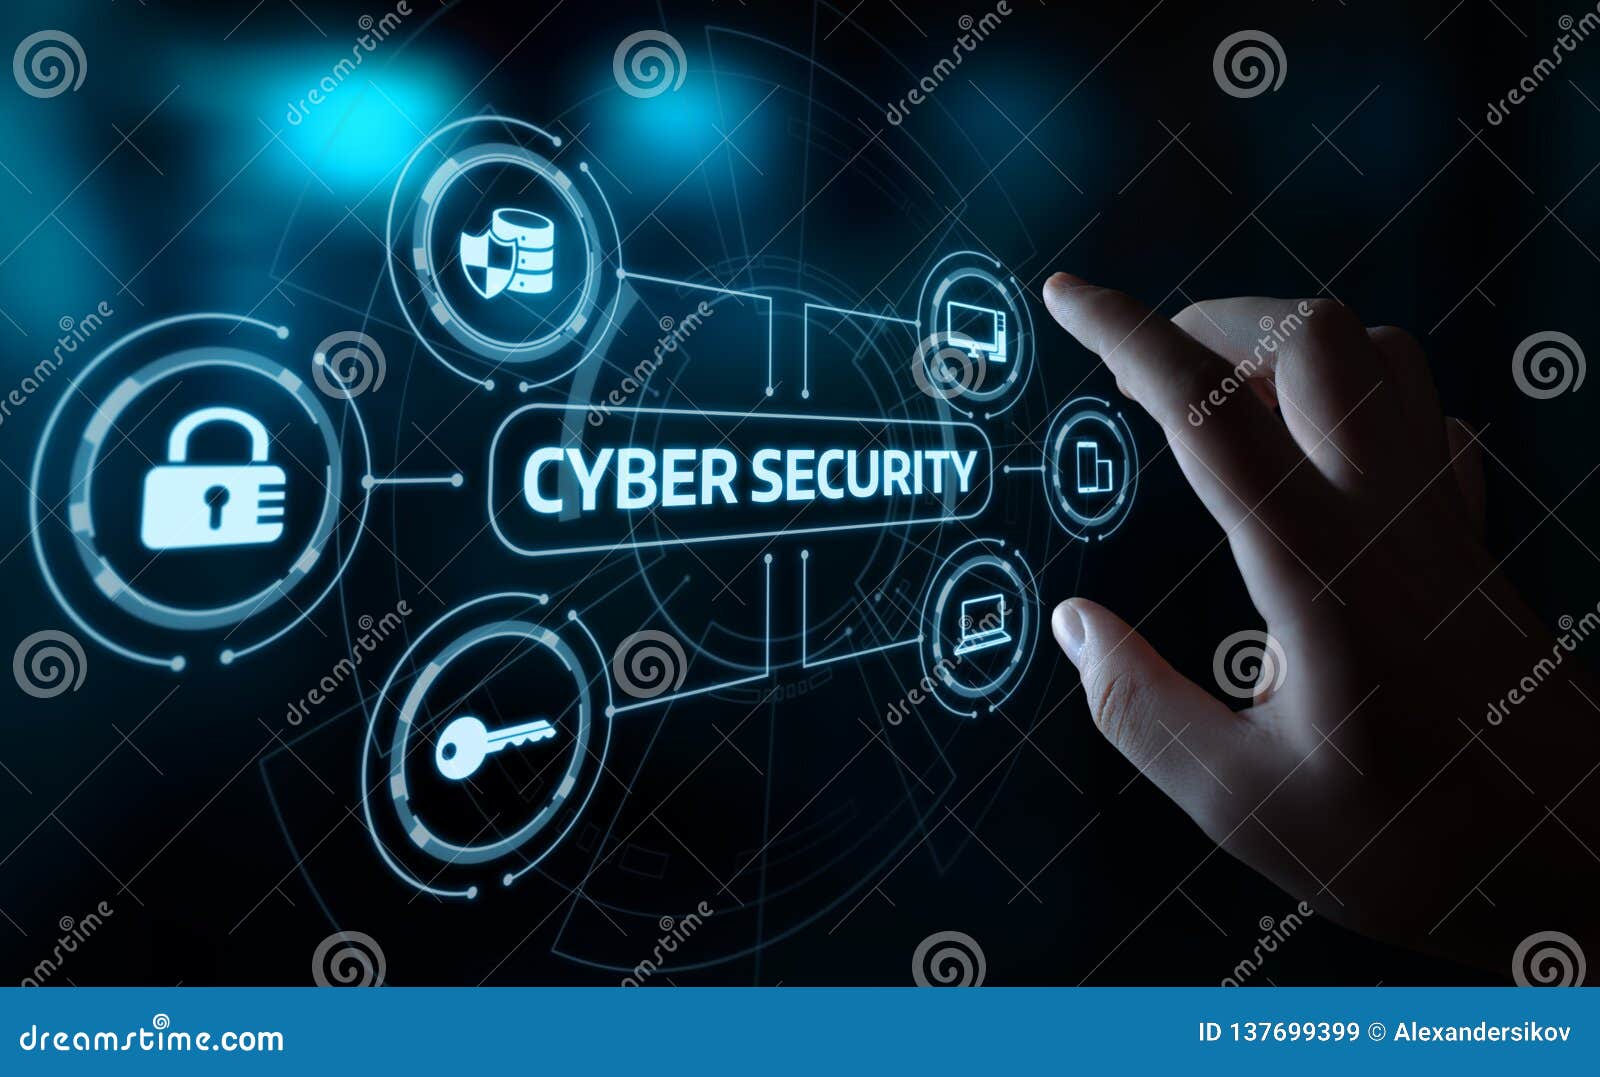 Cyber Security Data Protection Business Technology Privacy Concept